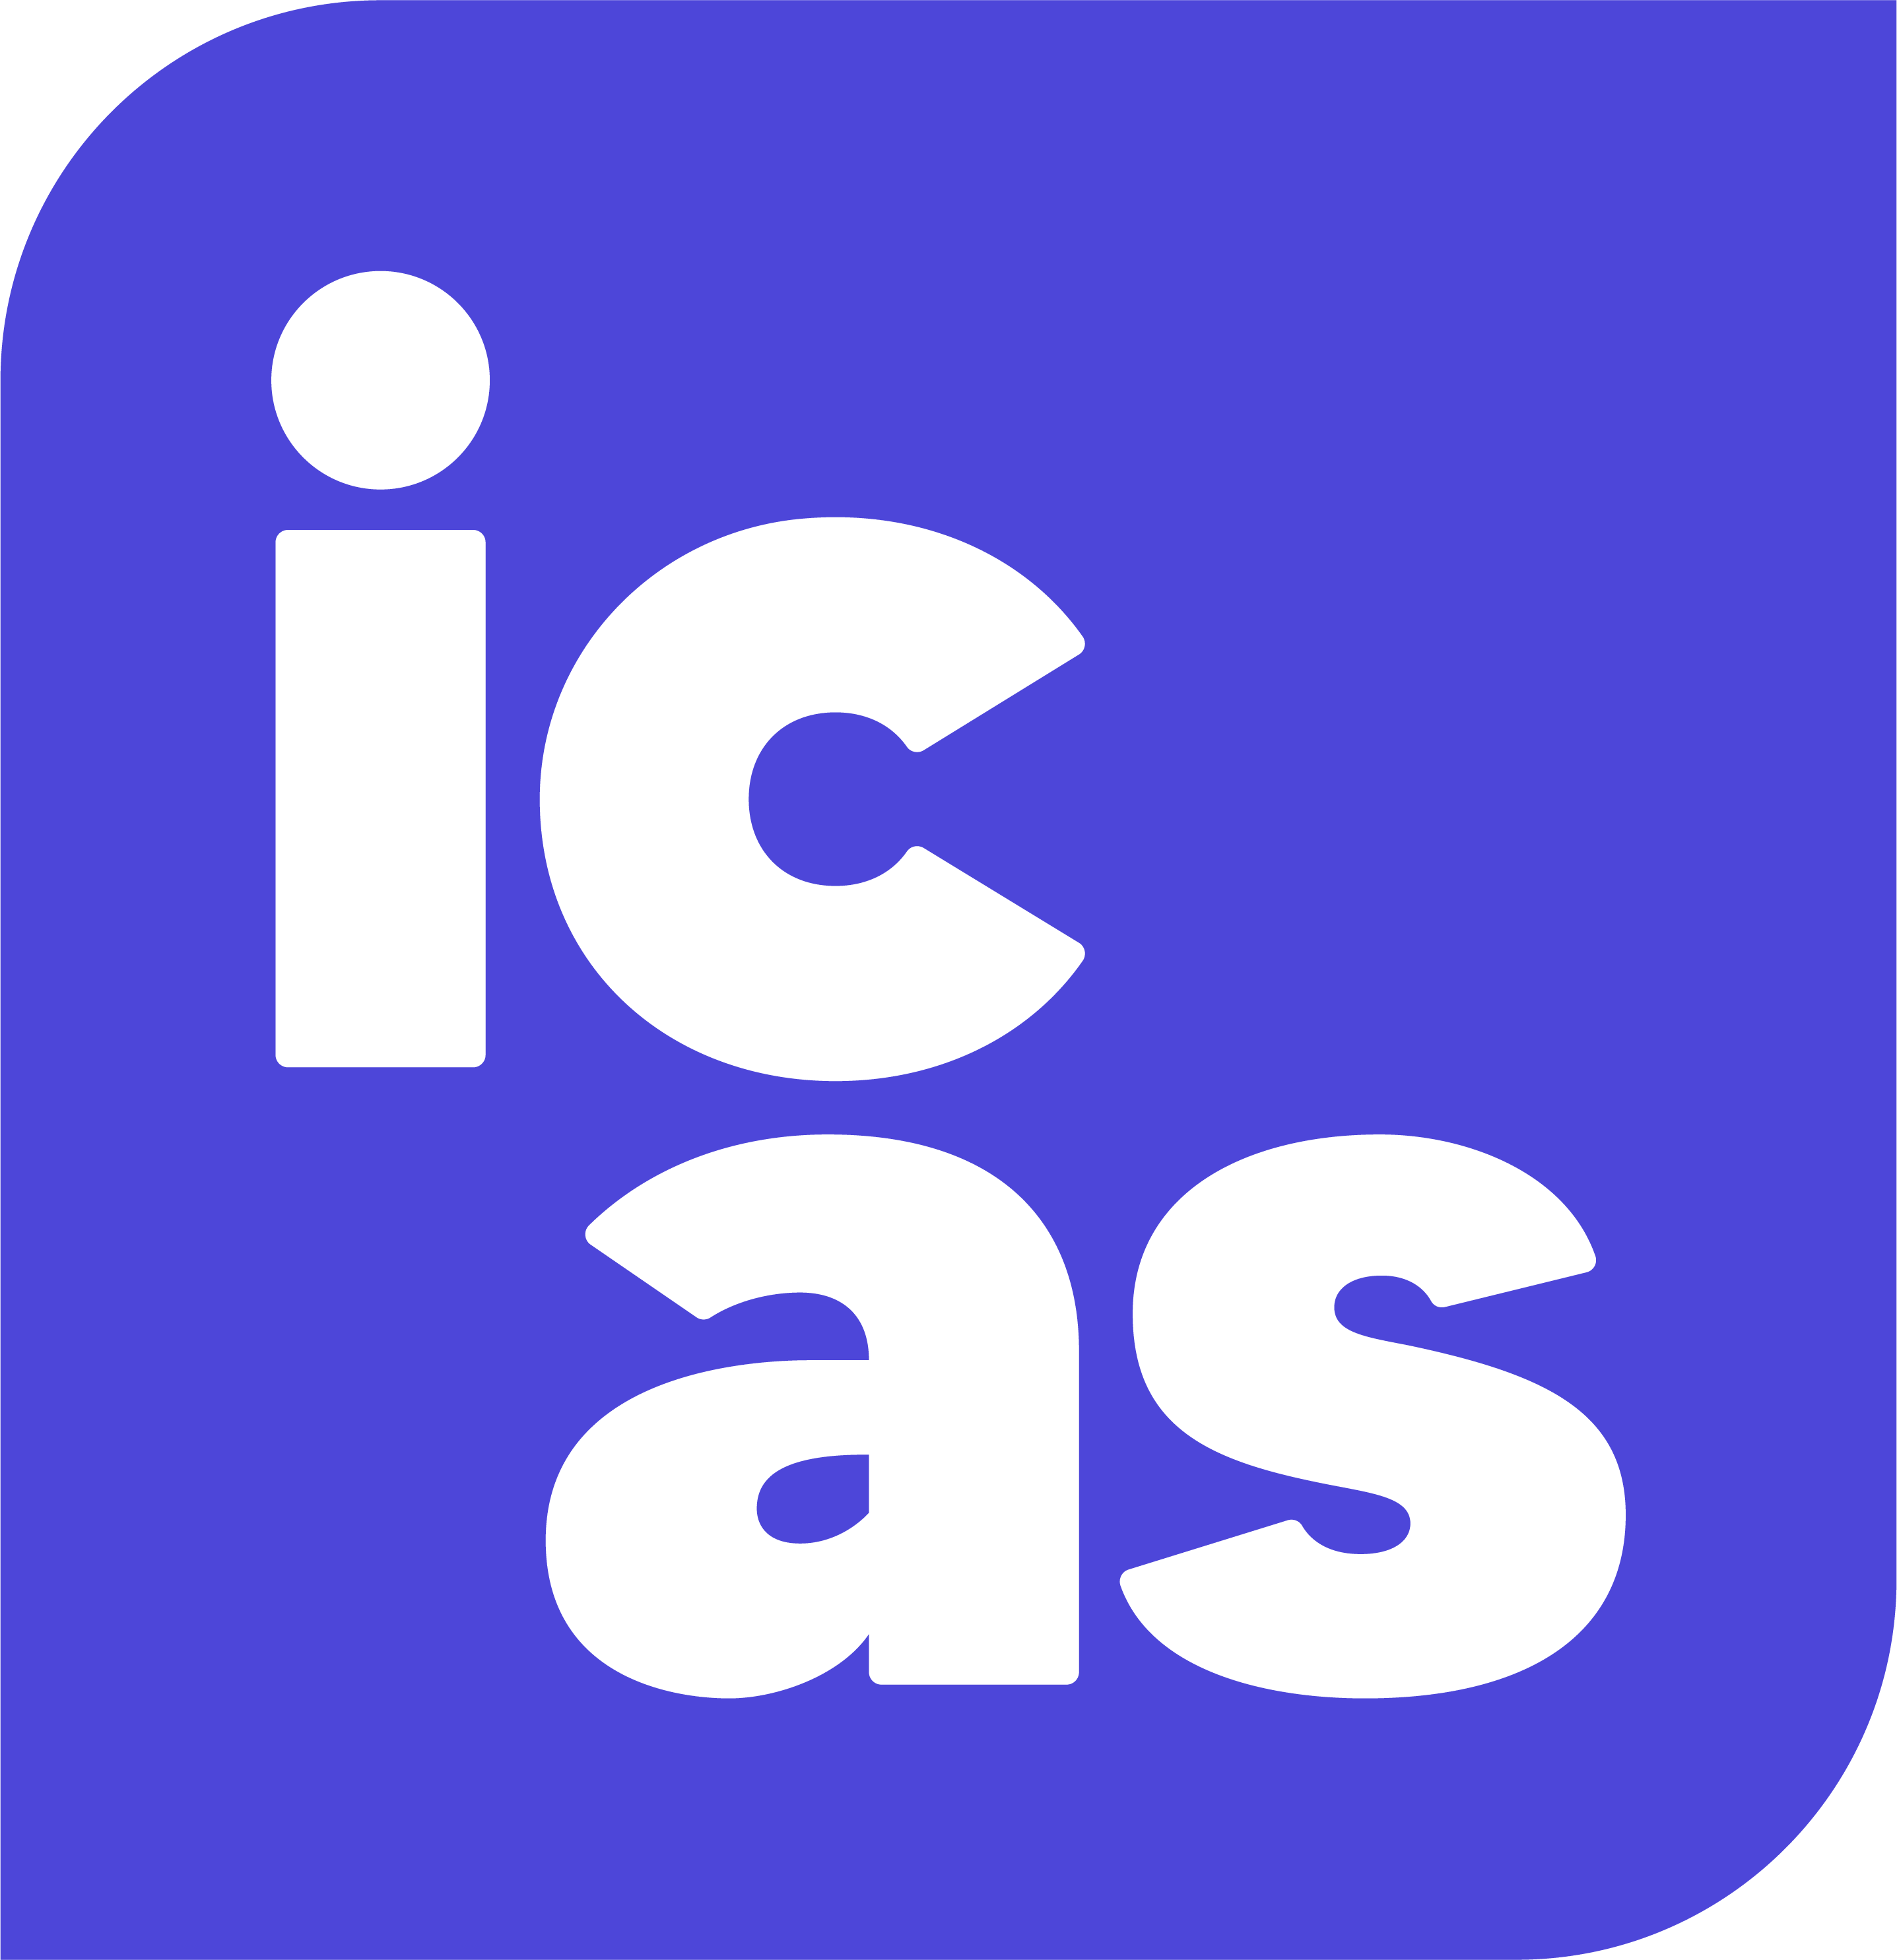 ICAS